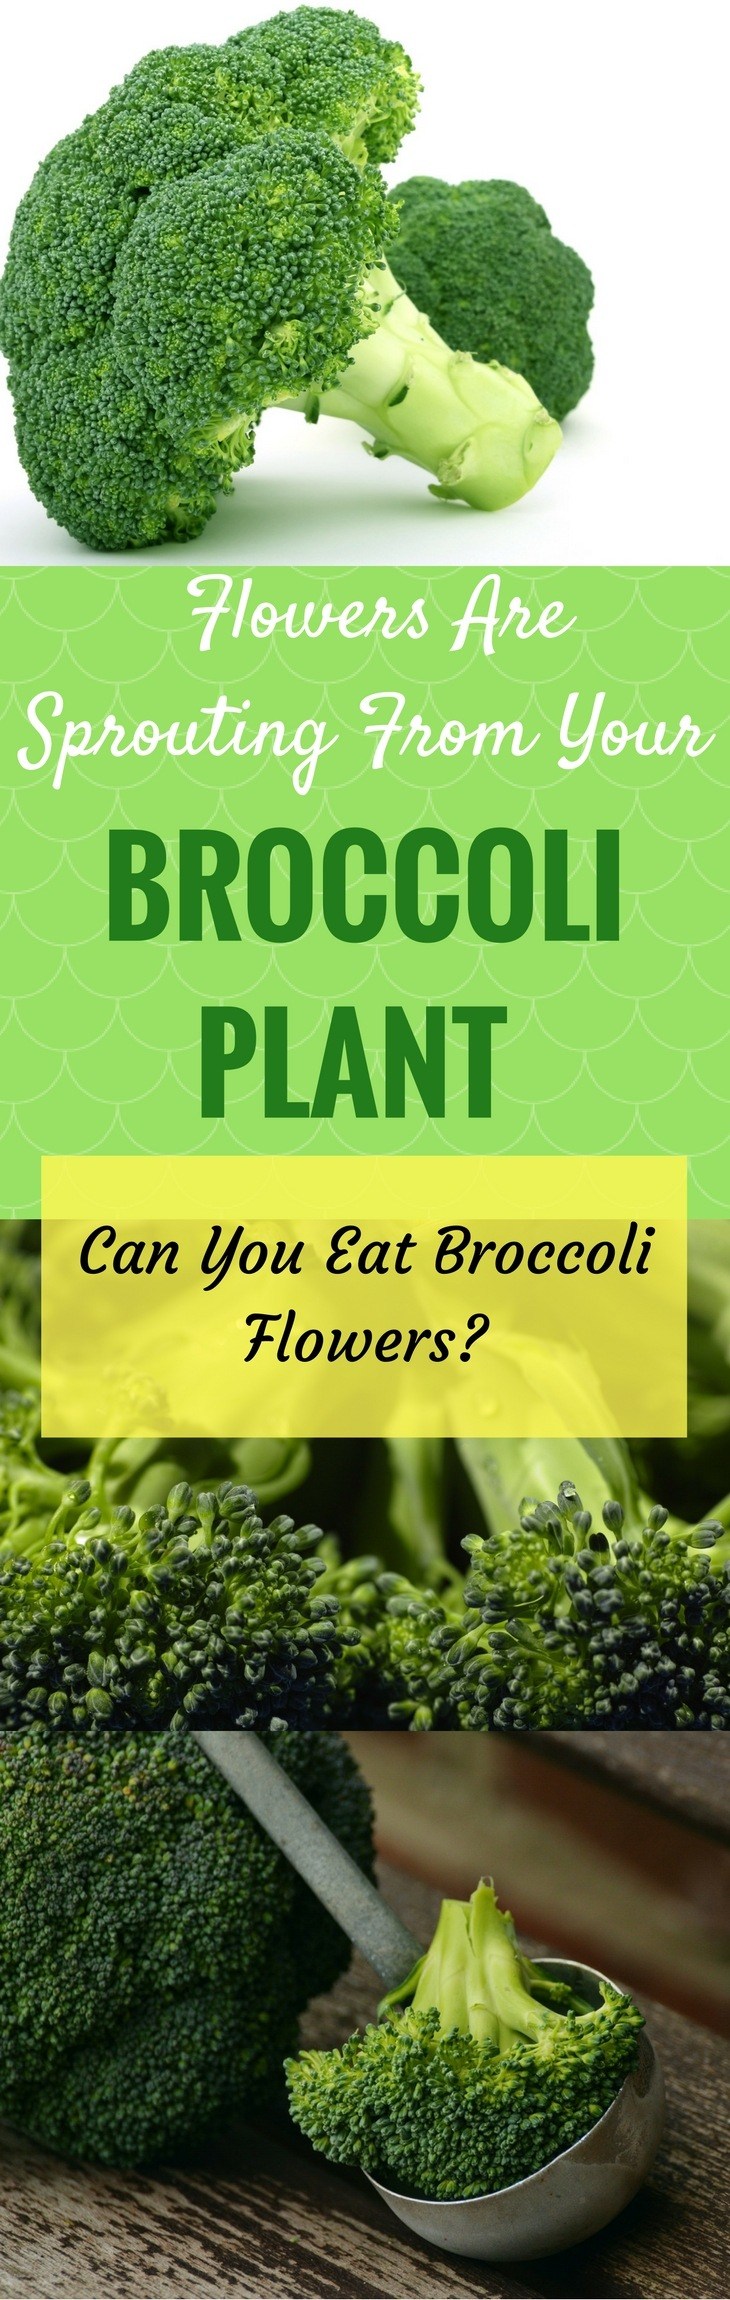 flowers are sprouting from your broccoli plant – can you eat broccoli flowers